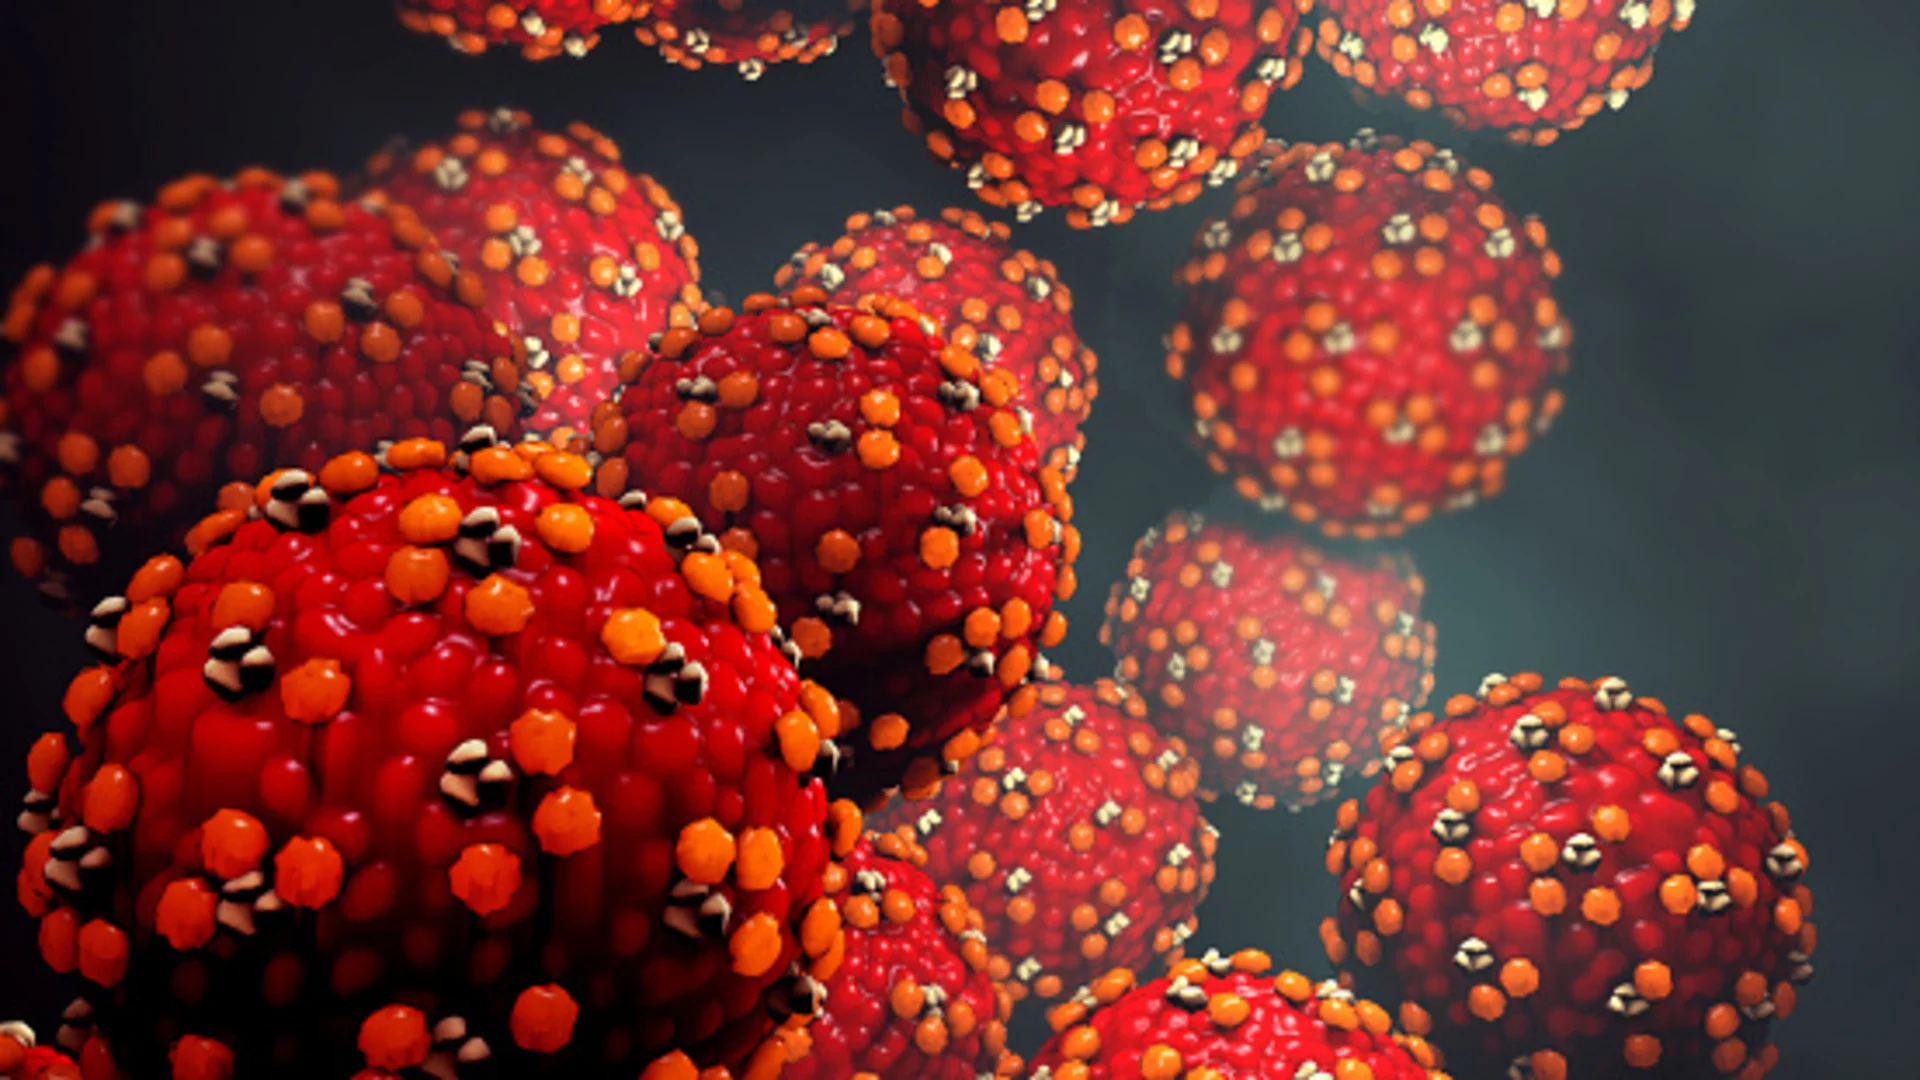 How weather could impact the spread of the measles virus